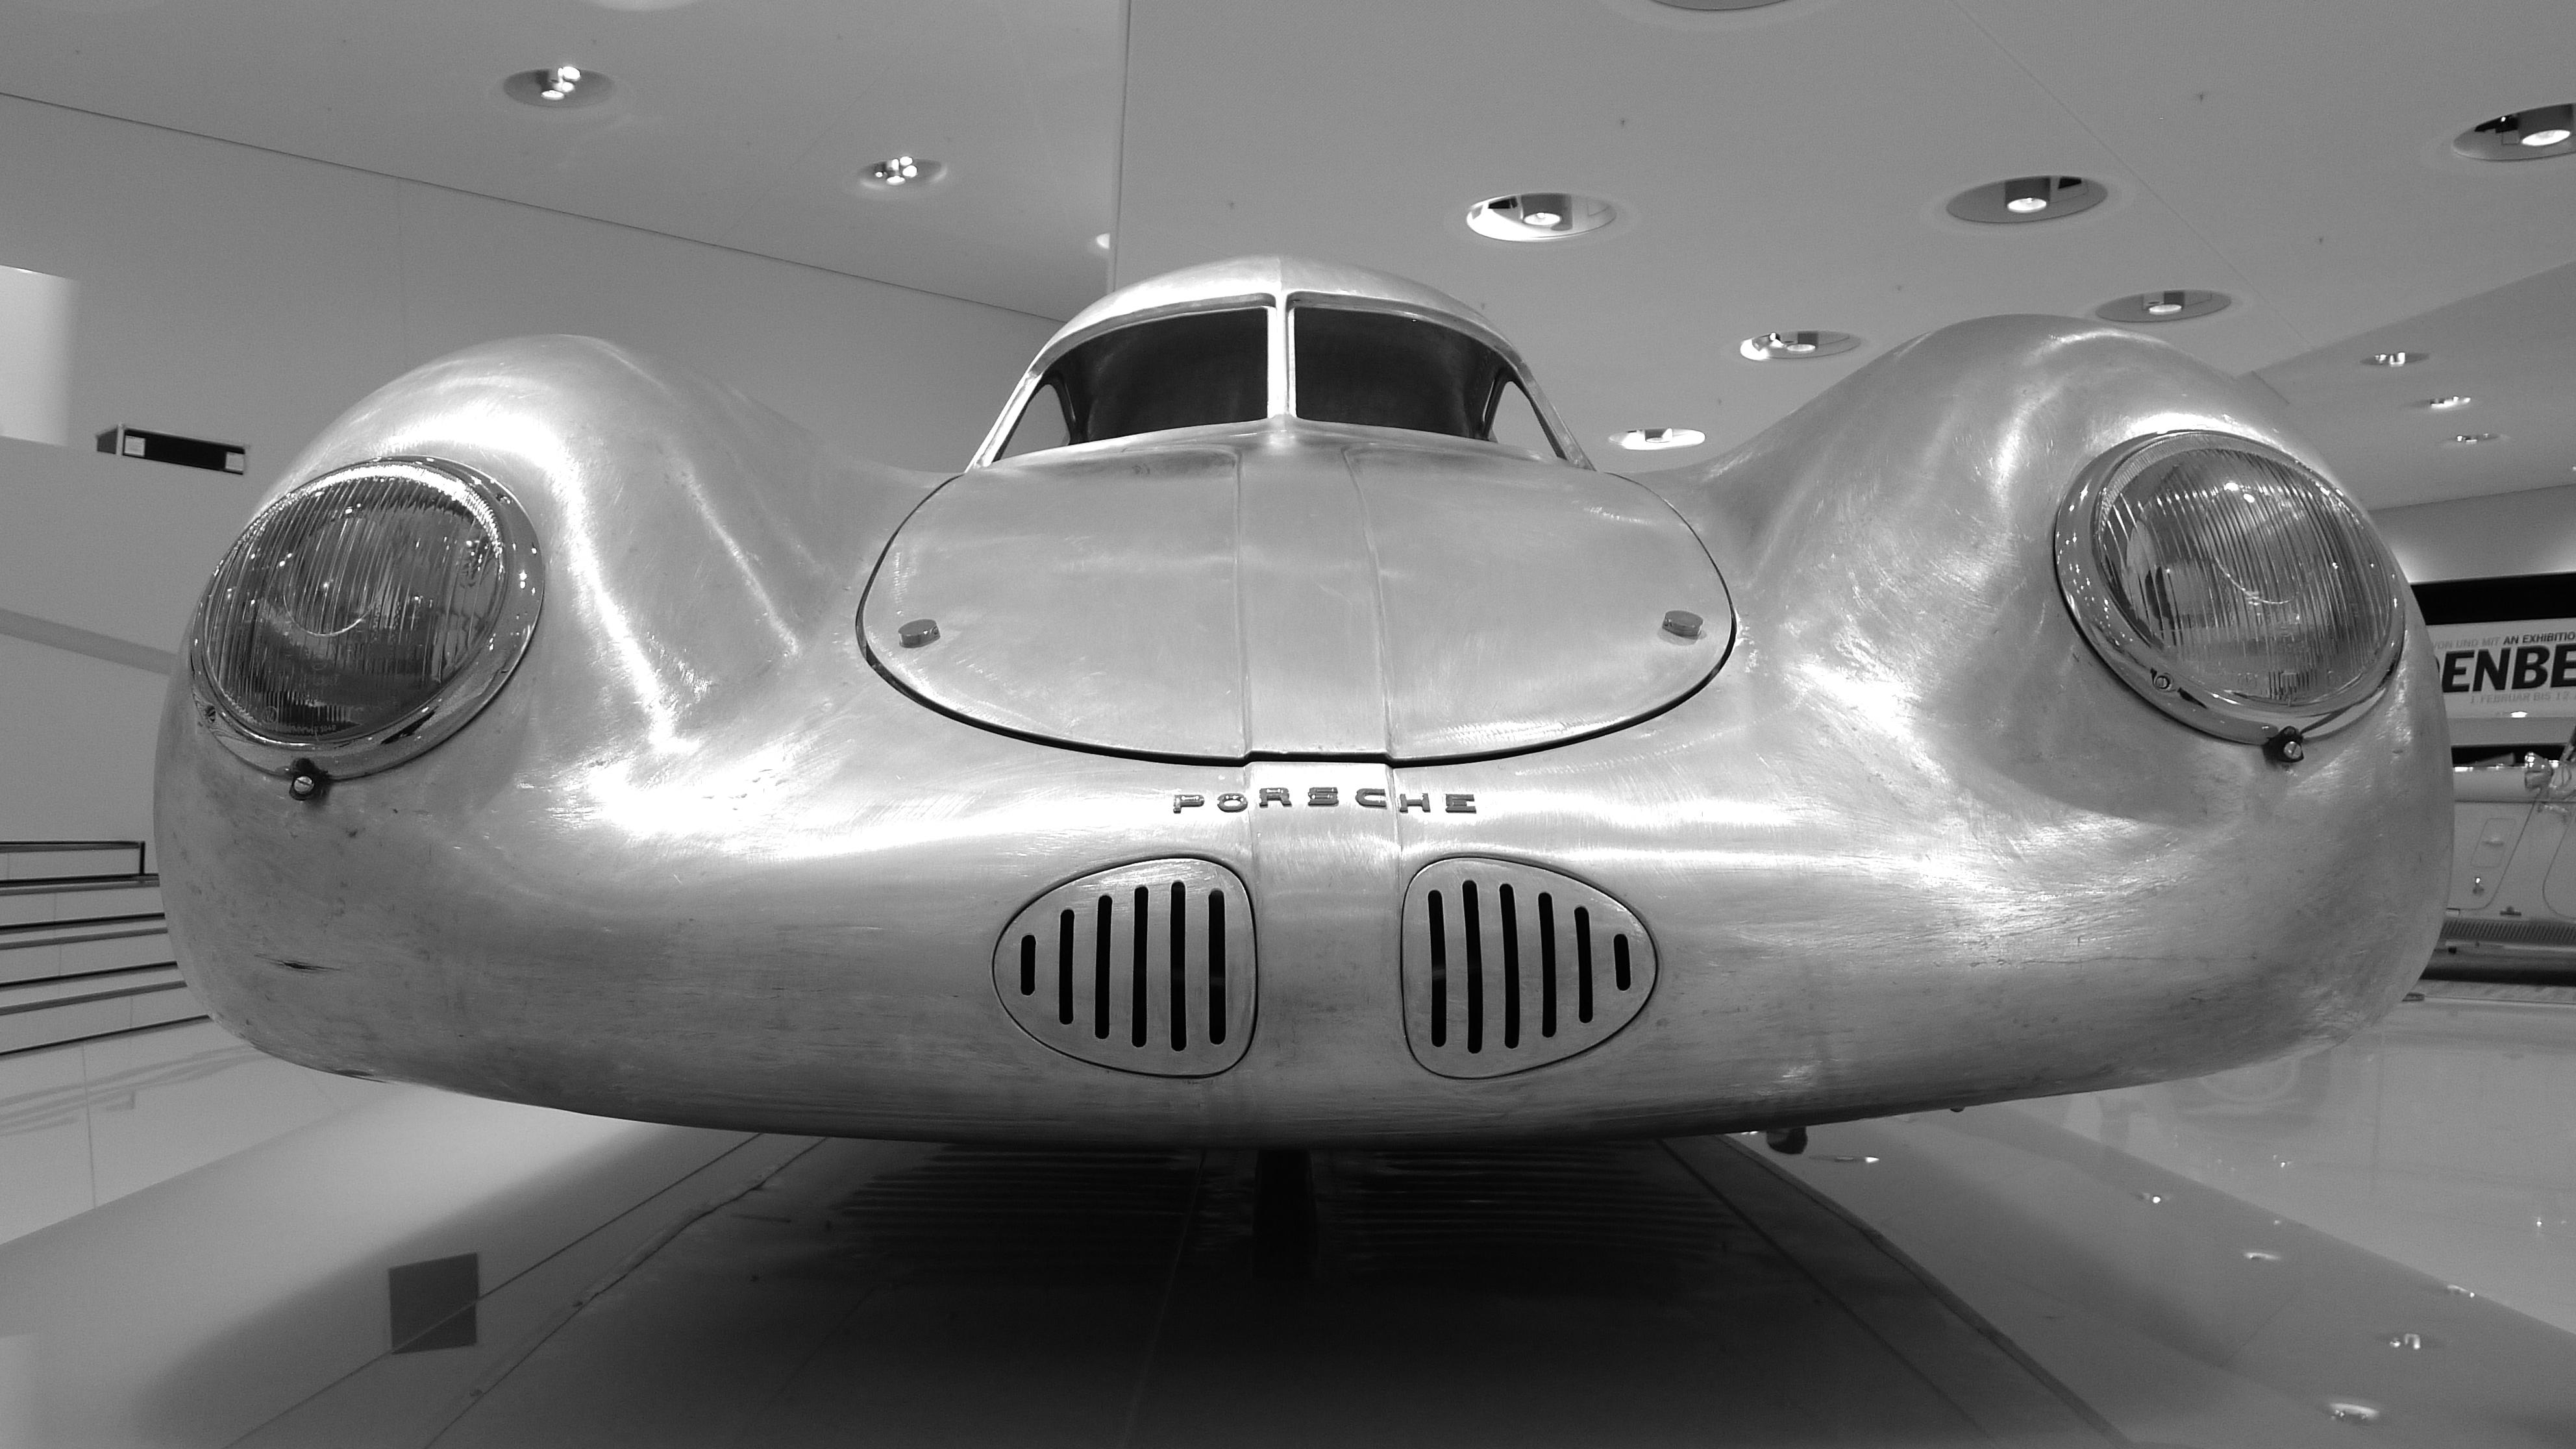 Aluminium body of early Porsche Typ 64 prototype, displayed without wheels, photo by Winfried Scheuer.jpg